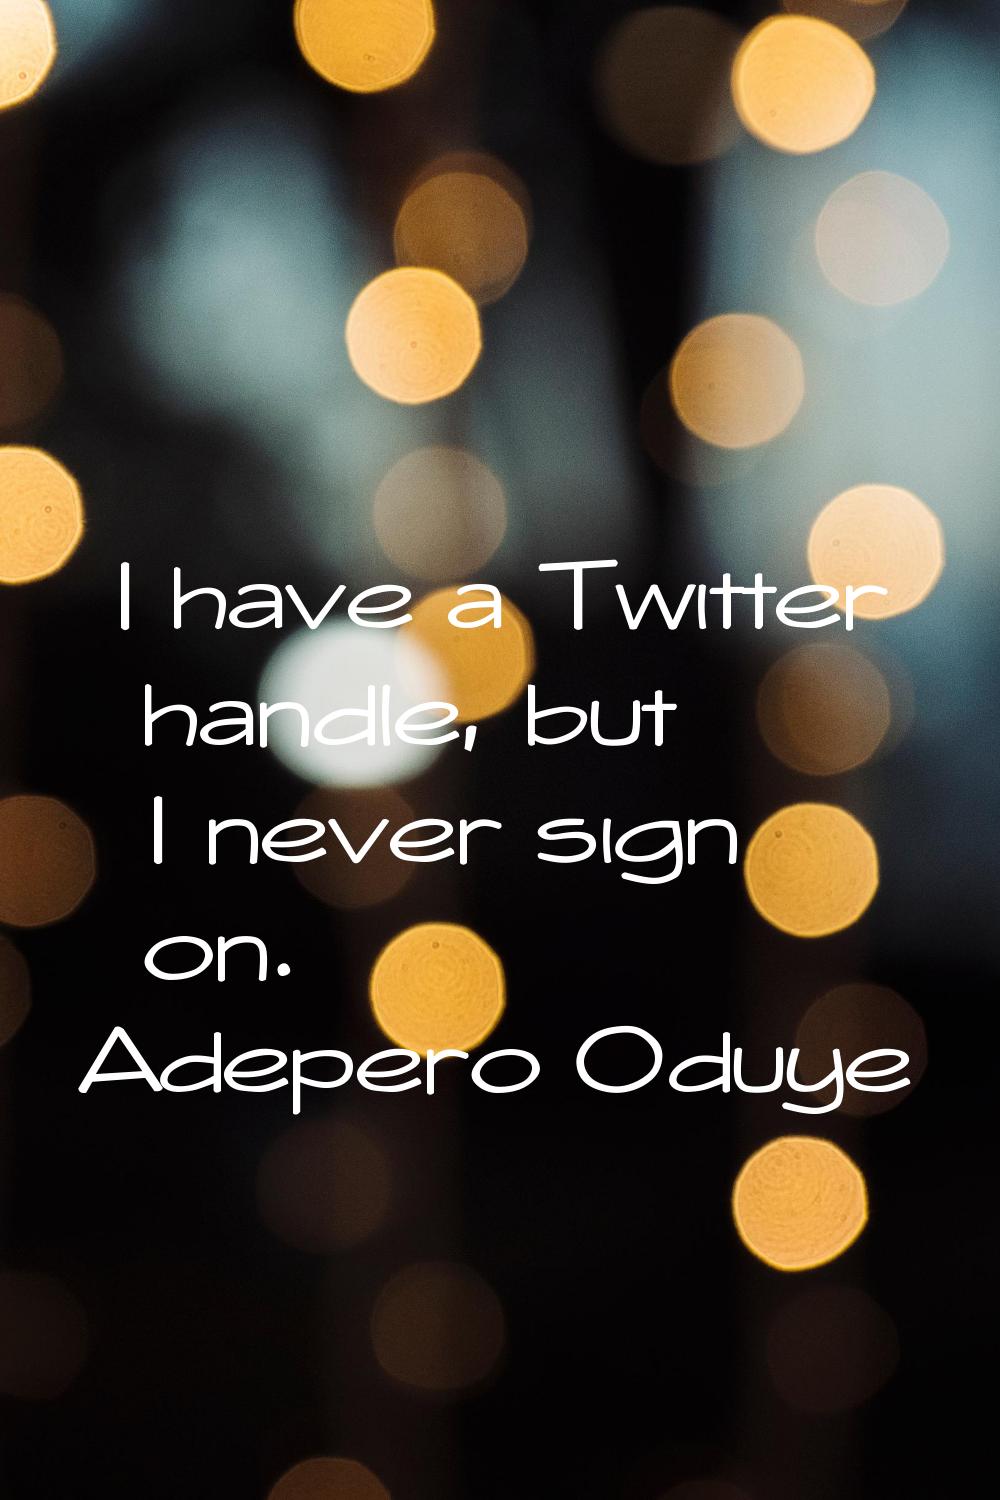 I have a Twitter handle, but I never sign on.